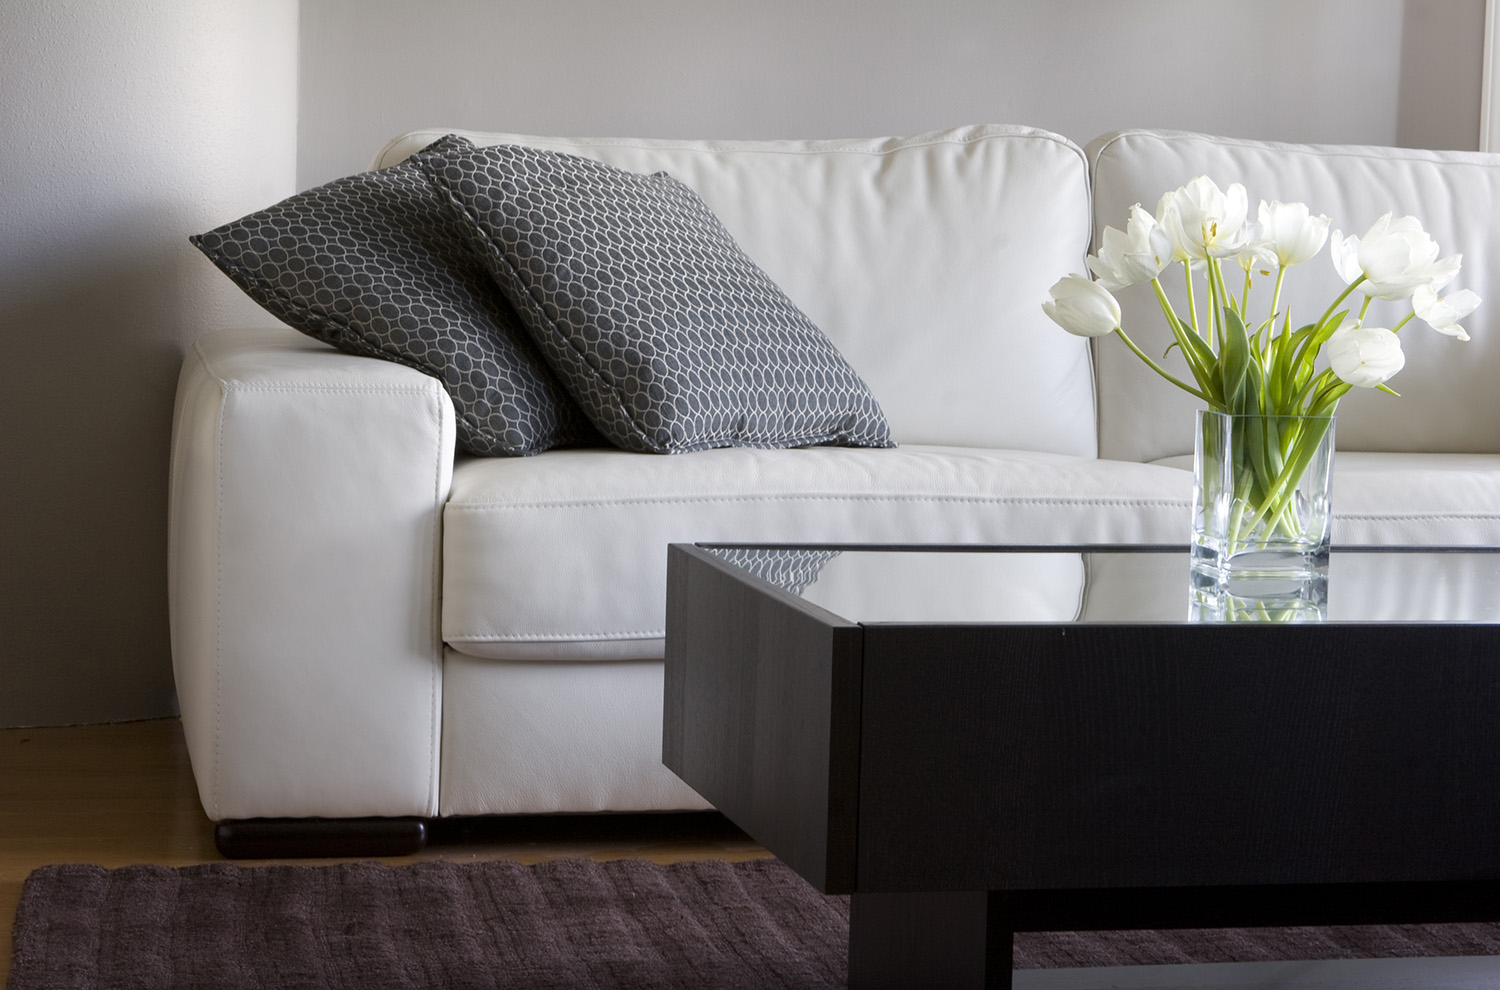 How To Clean A White Leather Couch, How To Deep Clean A White Leather Sofa